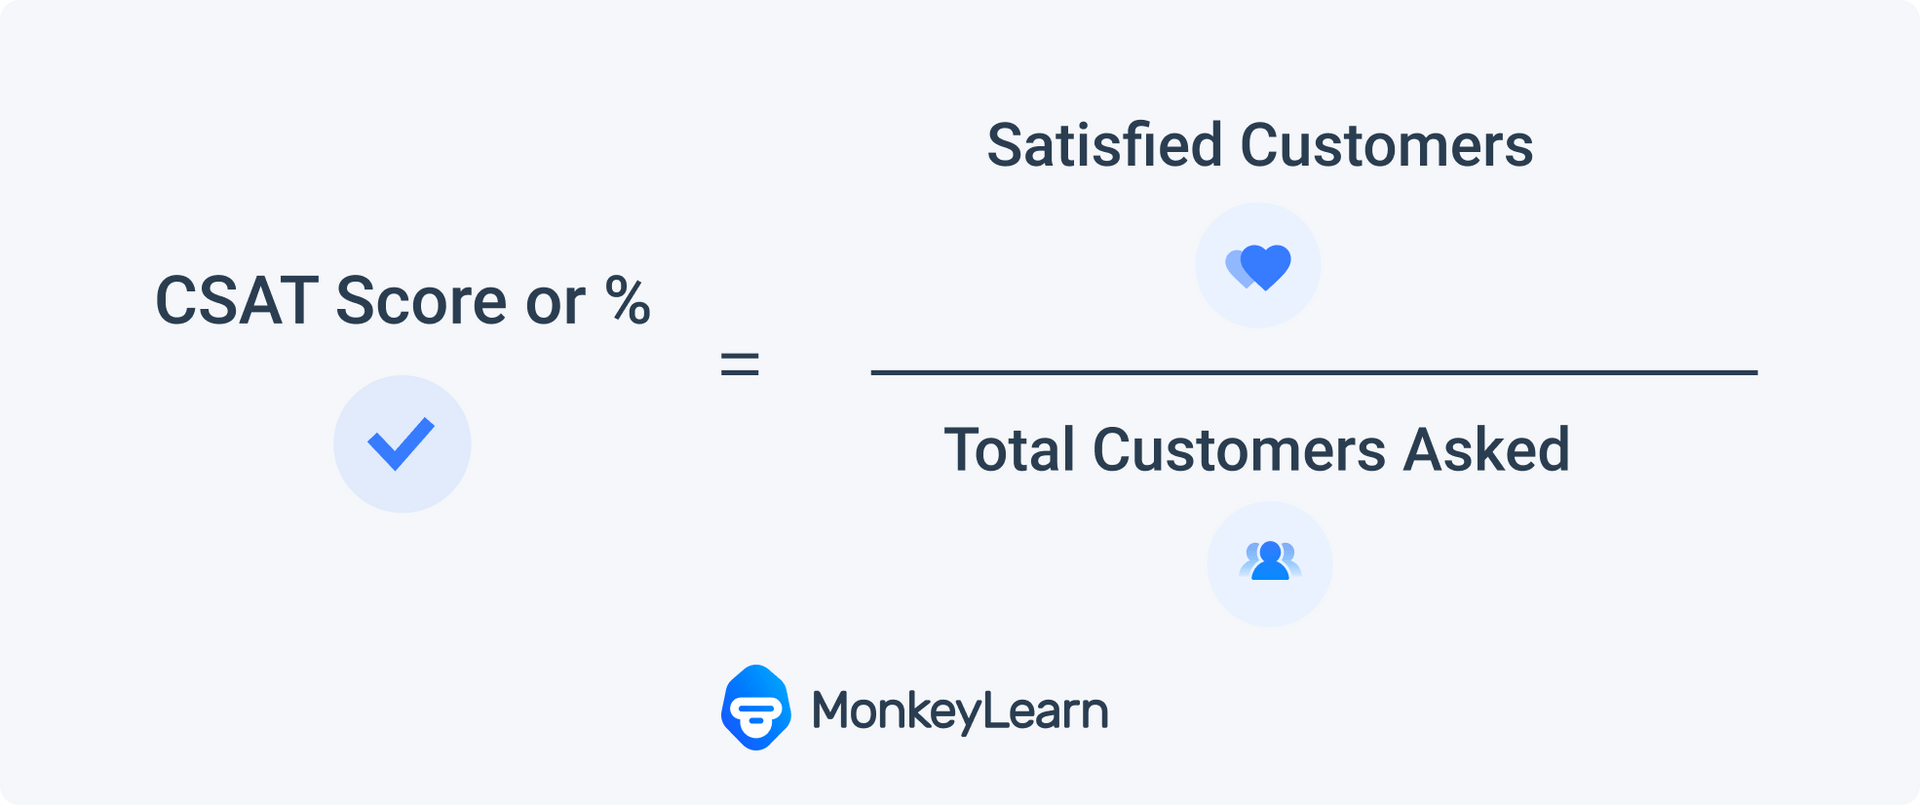 CSAT score or % = Satisfied Customers / Total Customers Asked X 100.